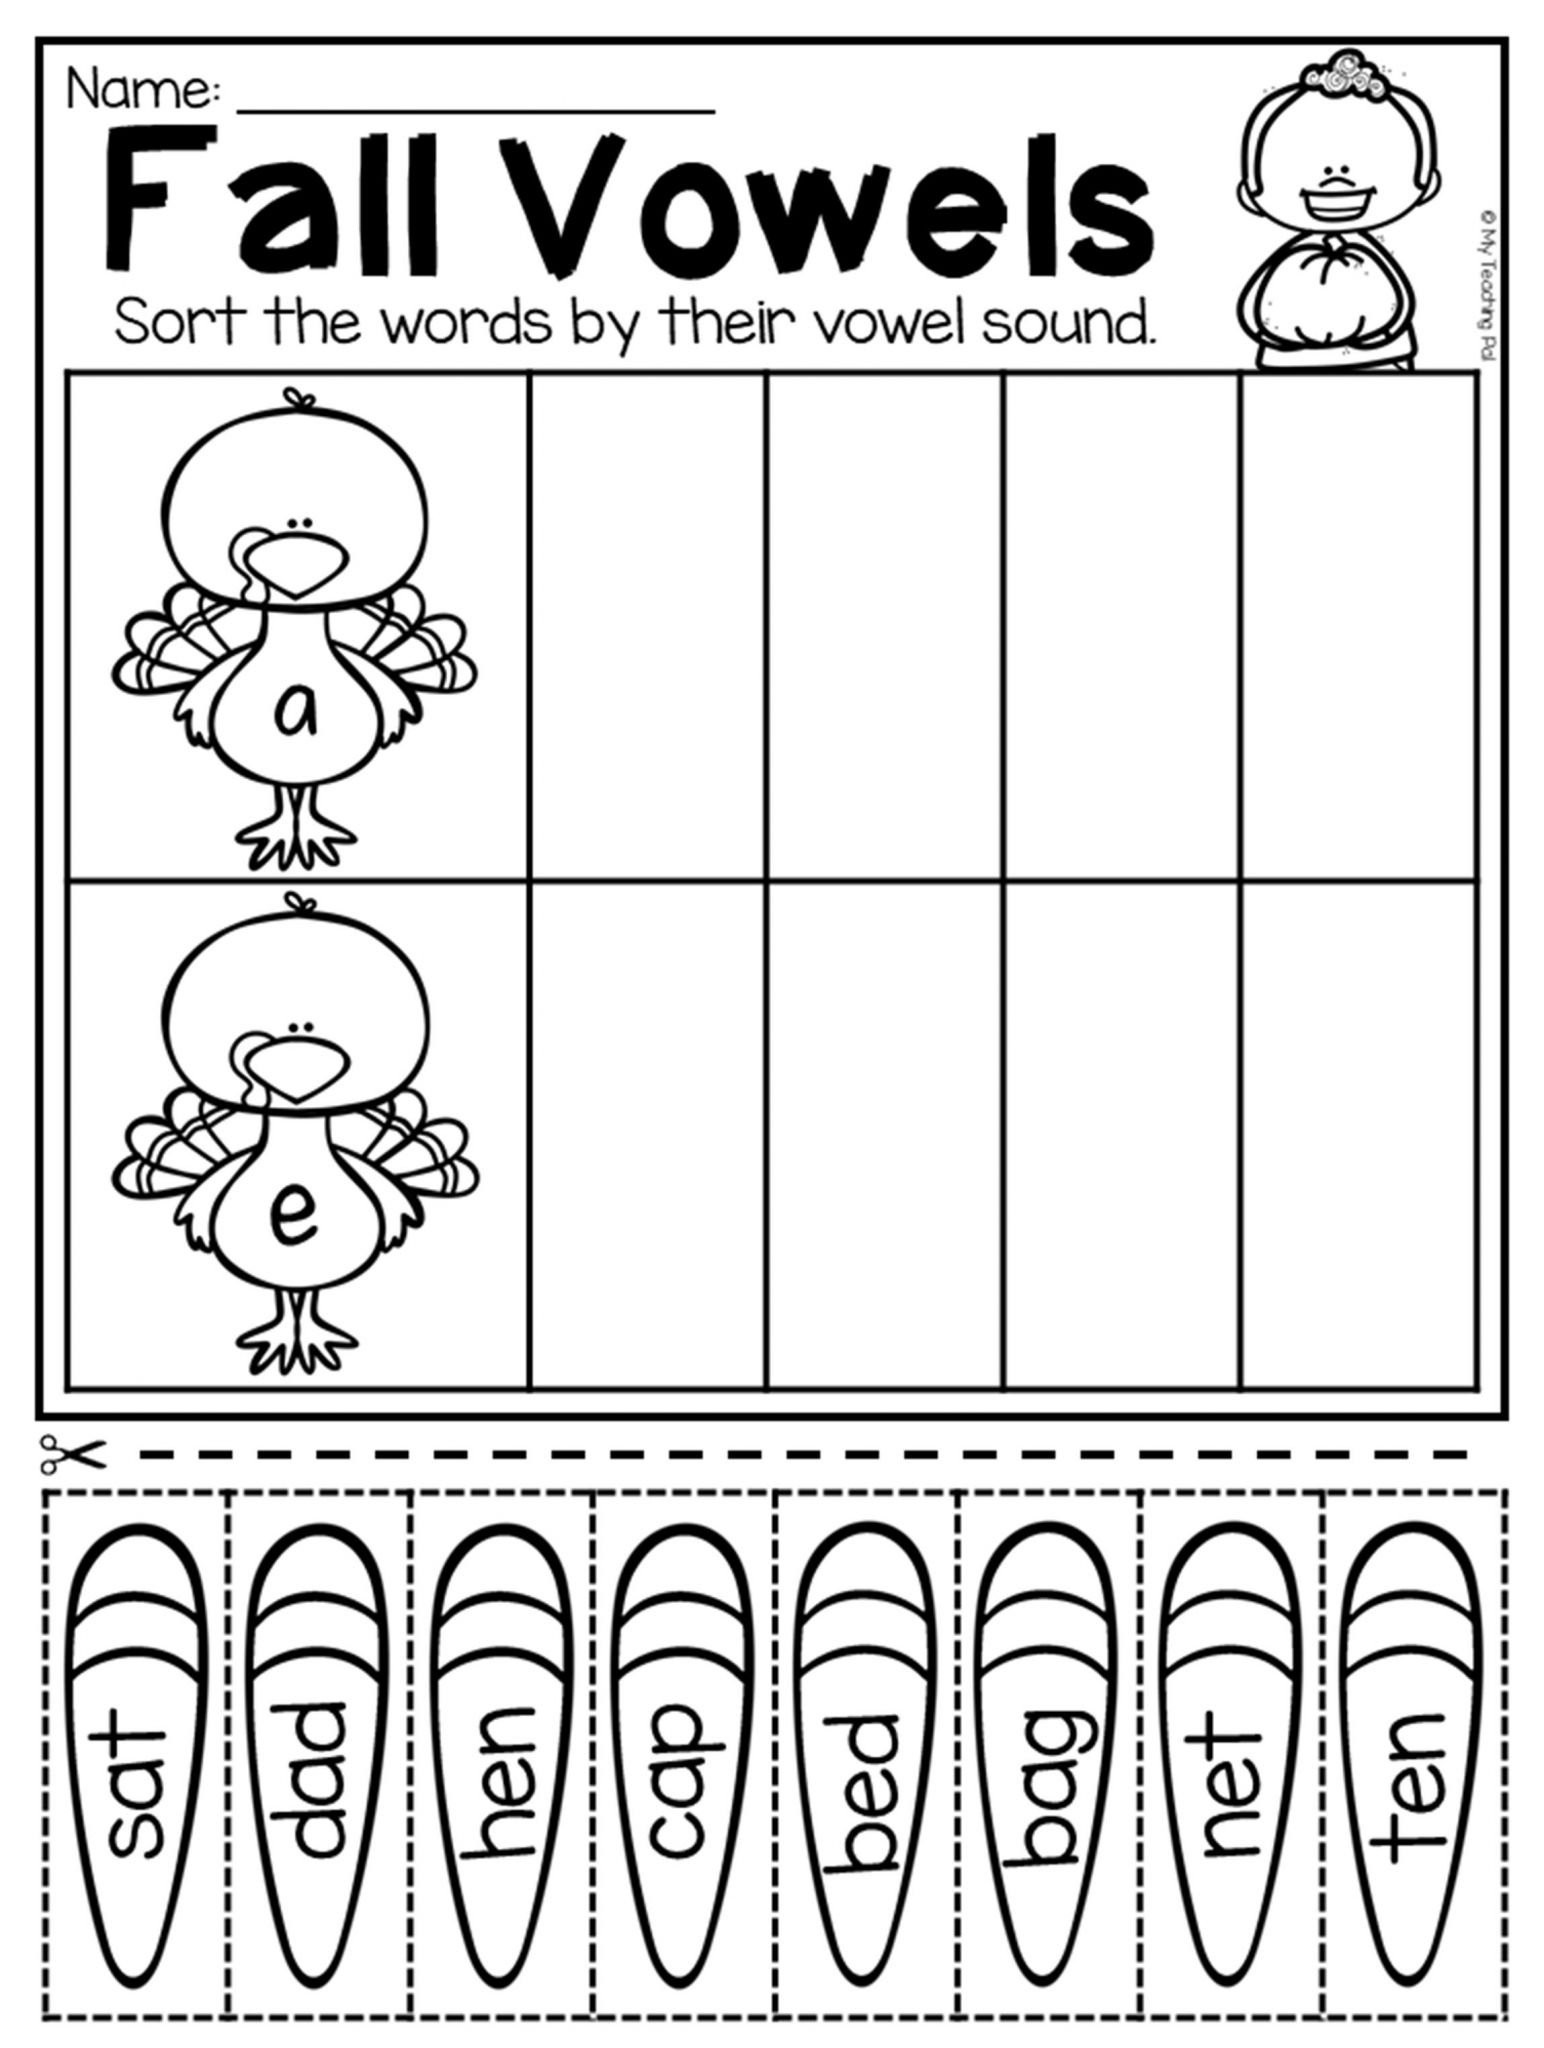 Counting Techniques Worksheet  Briefencounters For Counting Techniques Worksheet